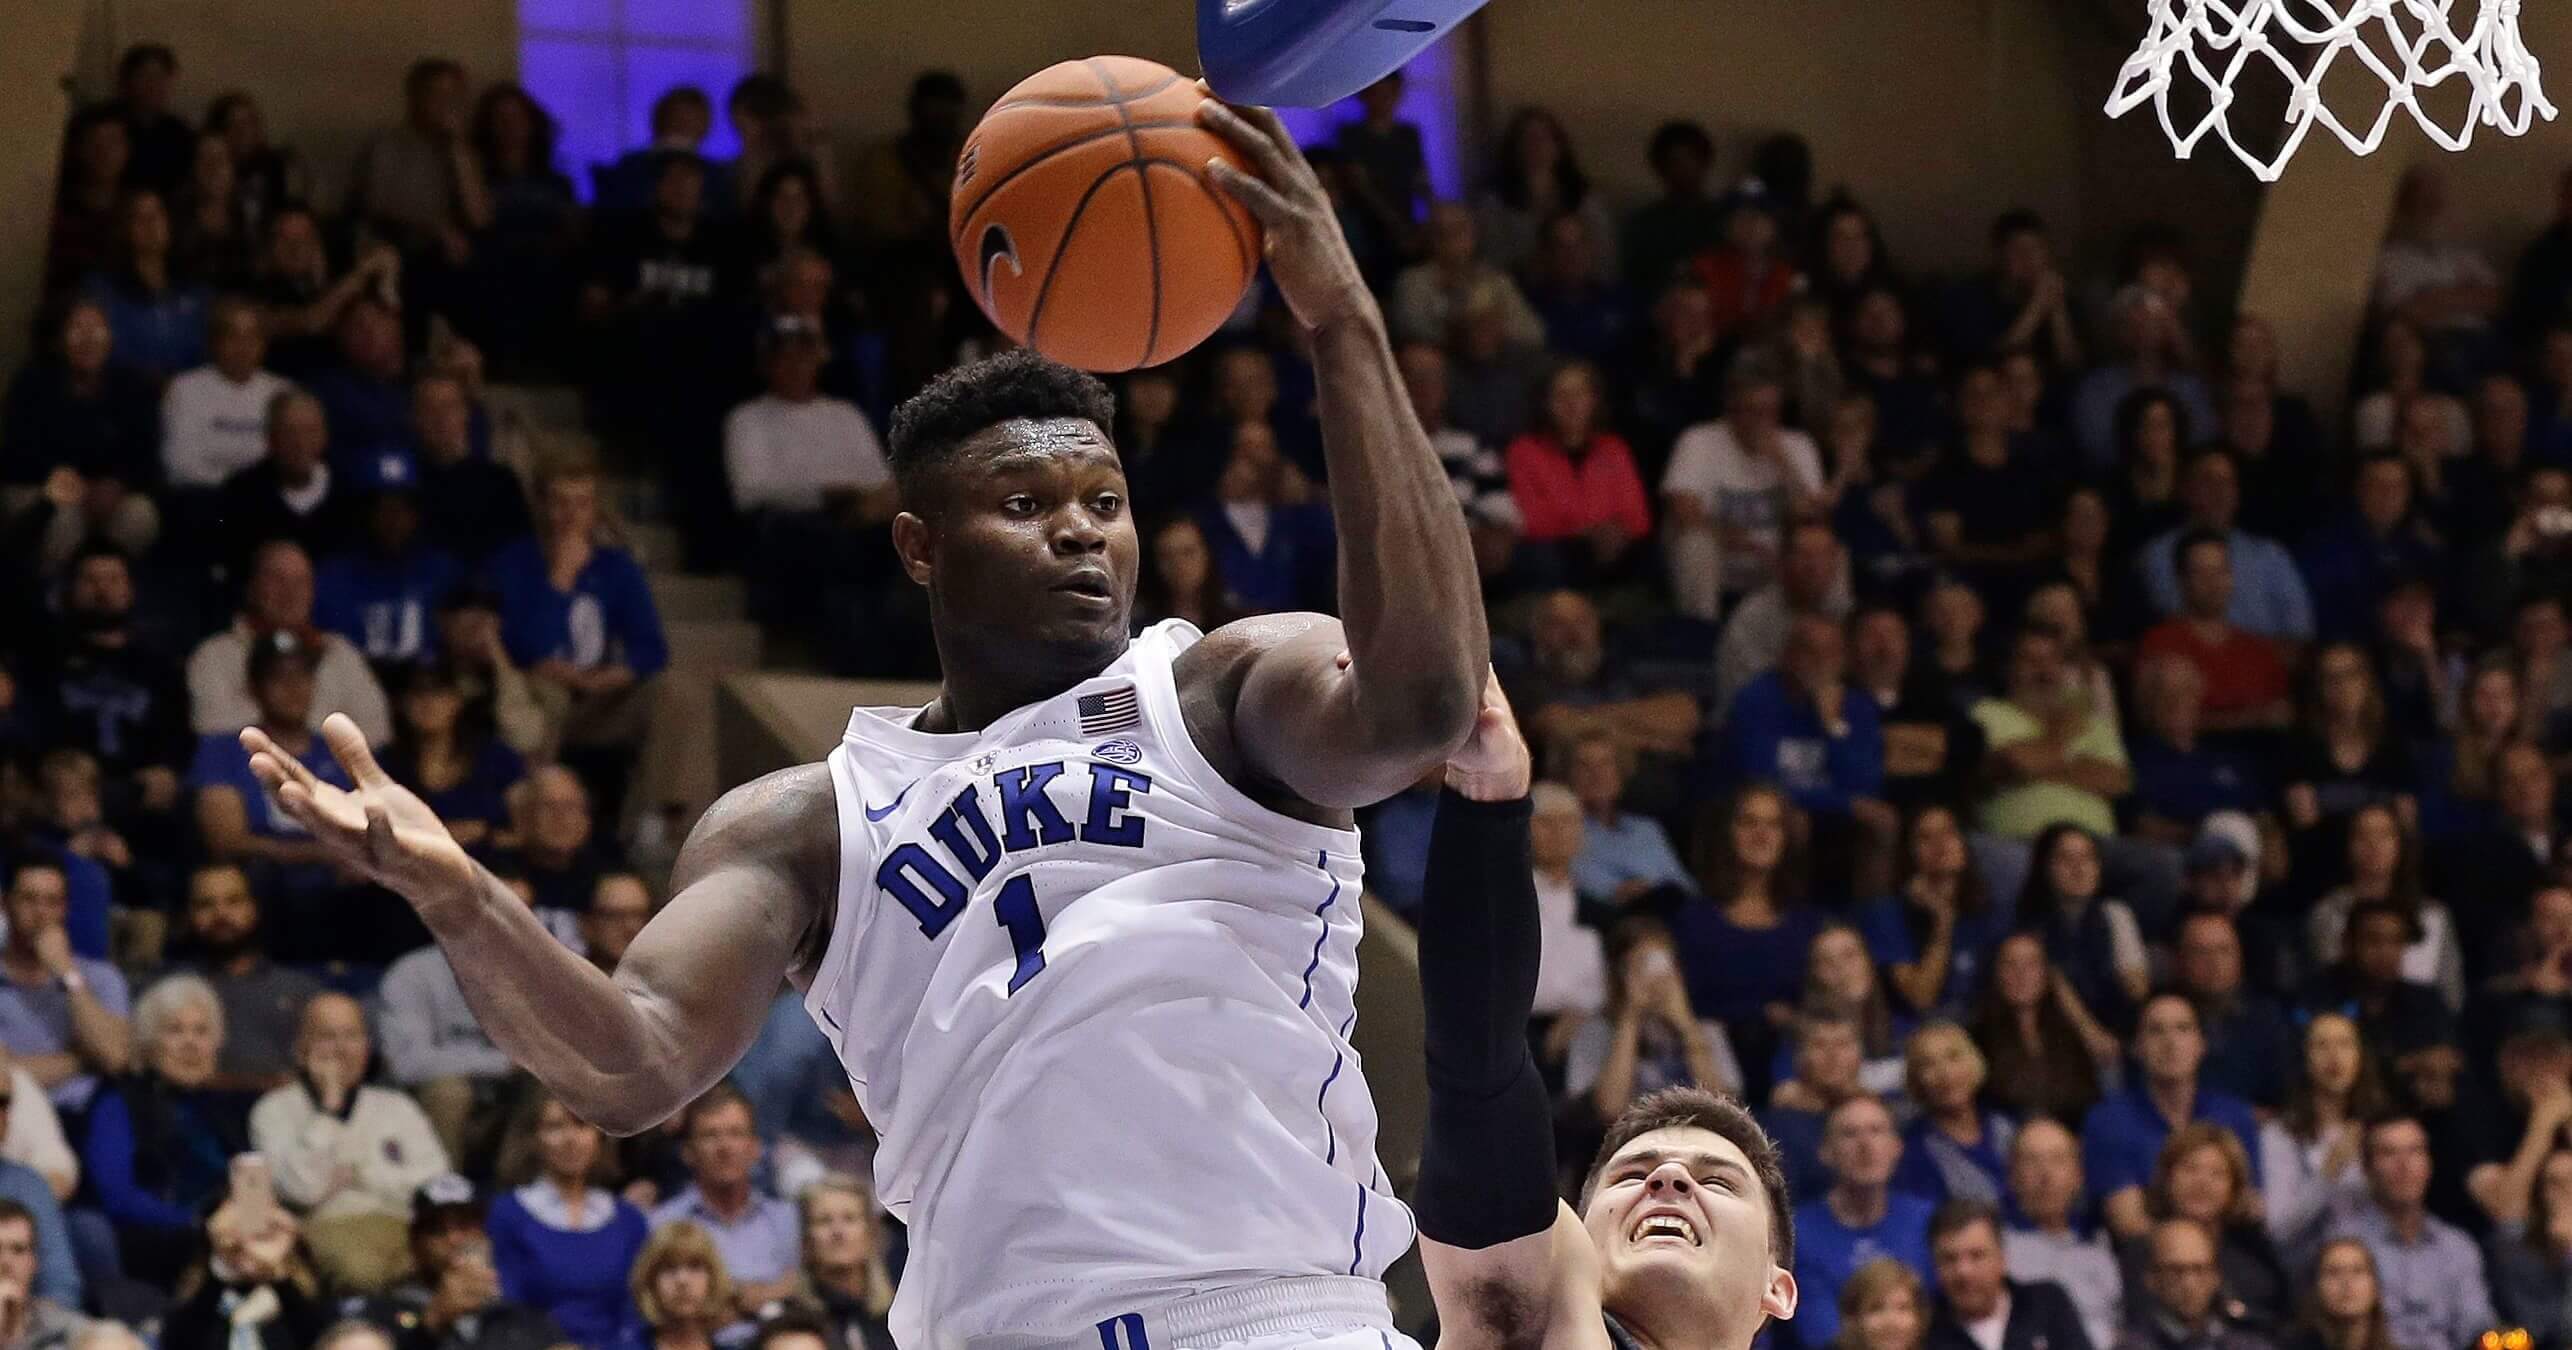 Duke's Zion Williamson looks toward the basket while Army's Tommy Funk defends during the second half of their game Sunday in Durham.